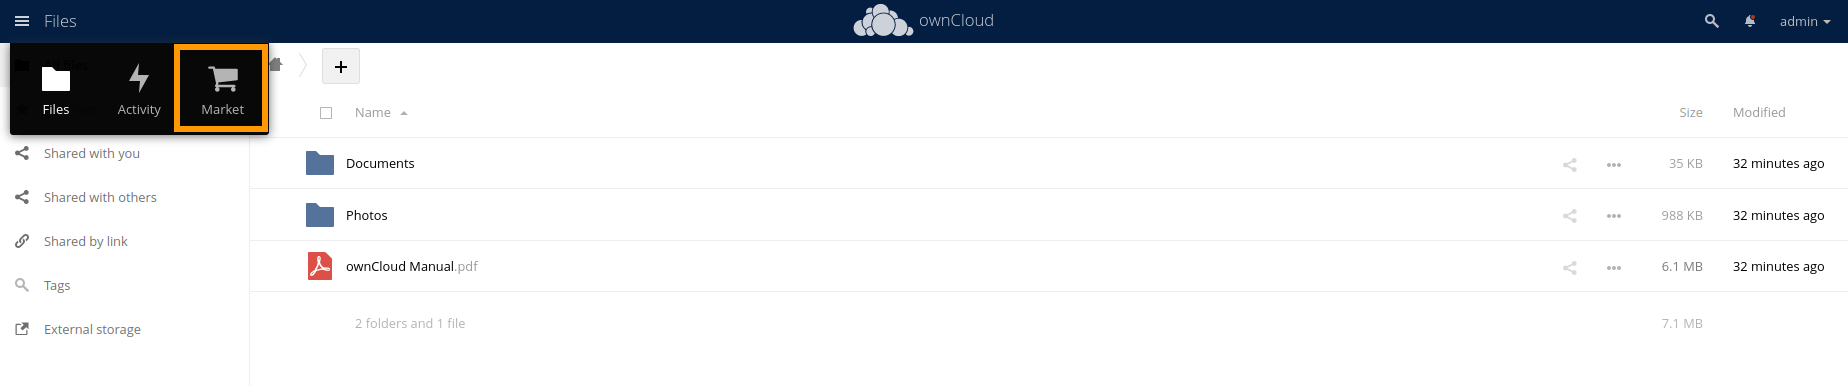 openioowncloud1.png